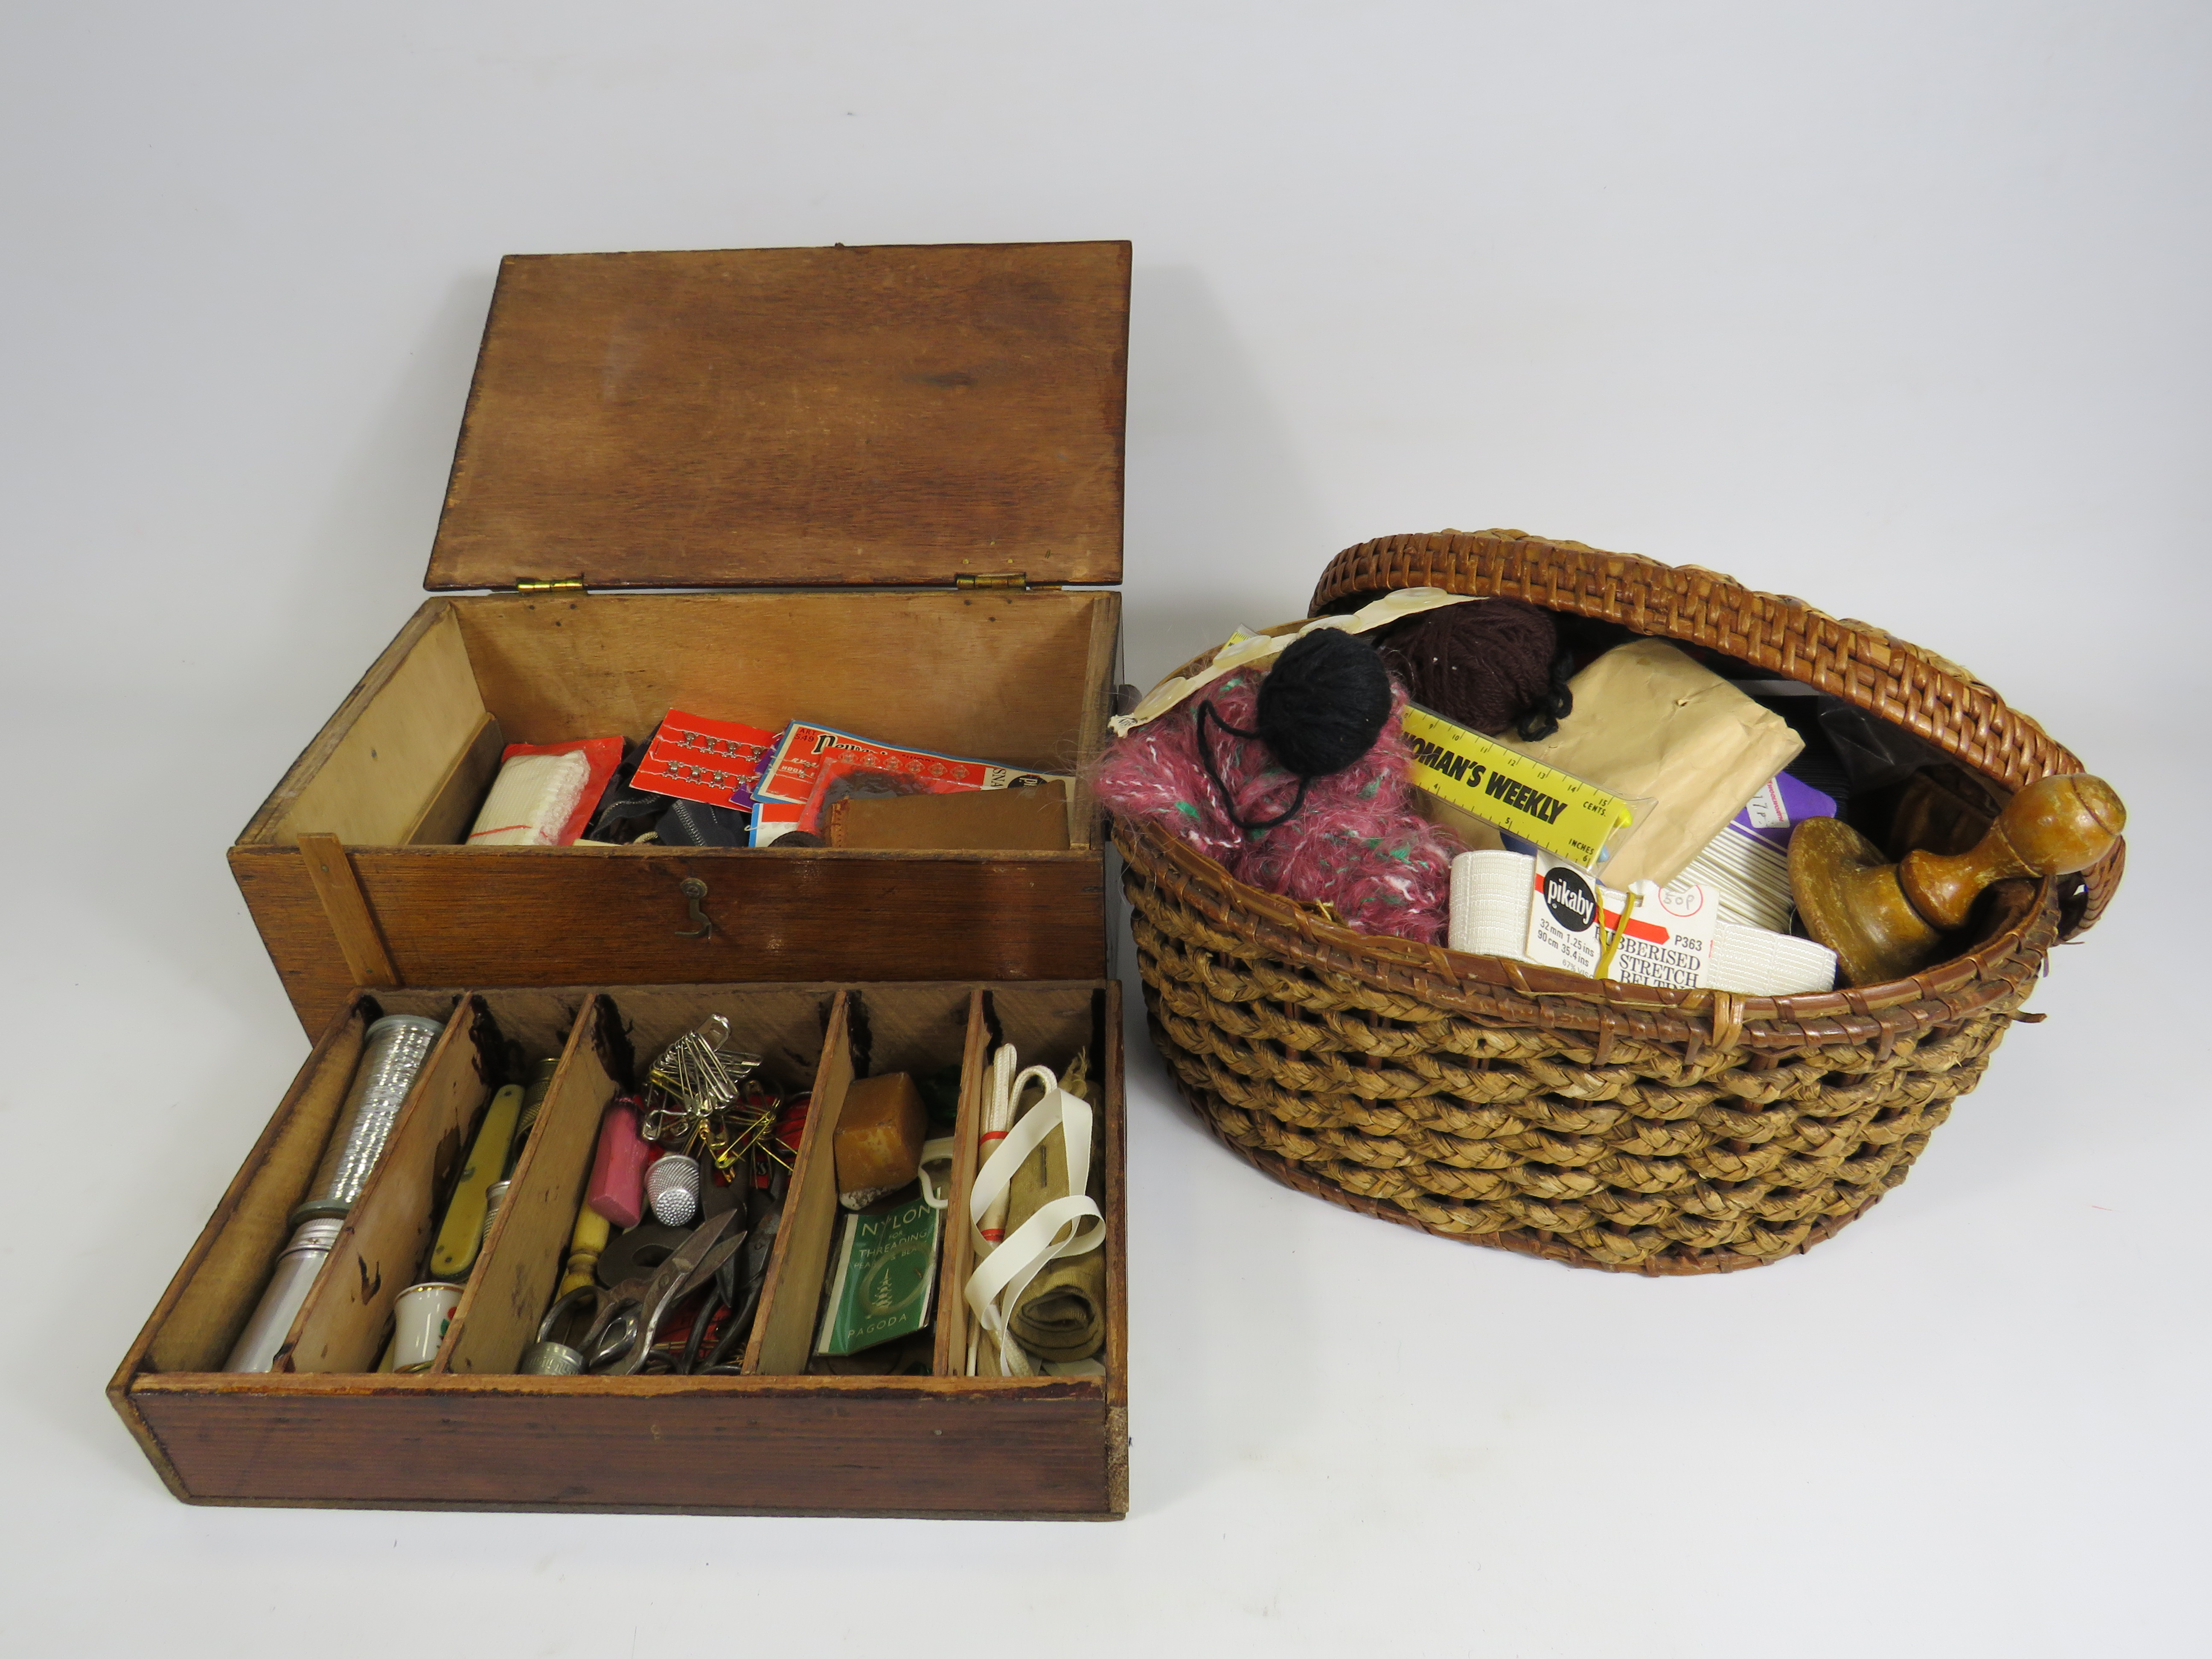 Vintage wooden sewing box and a wicker basket with contents. - Image 2 of 4